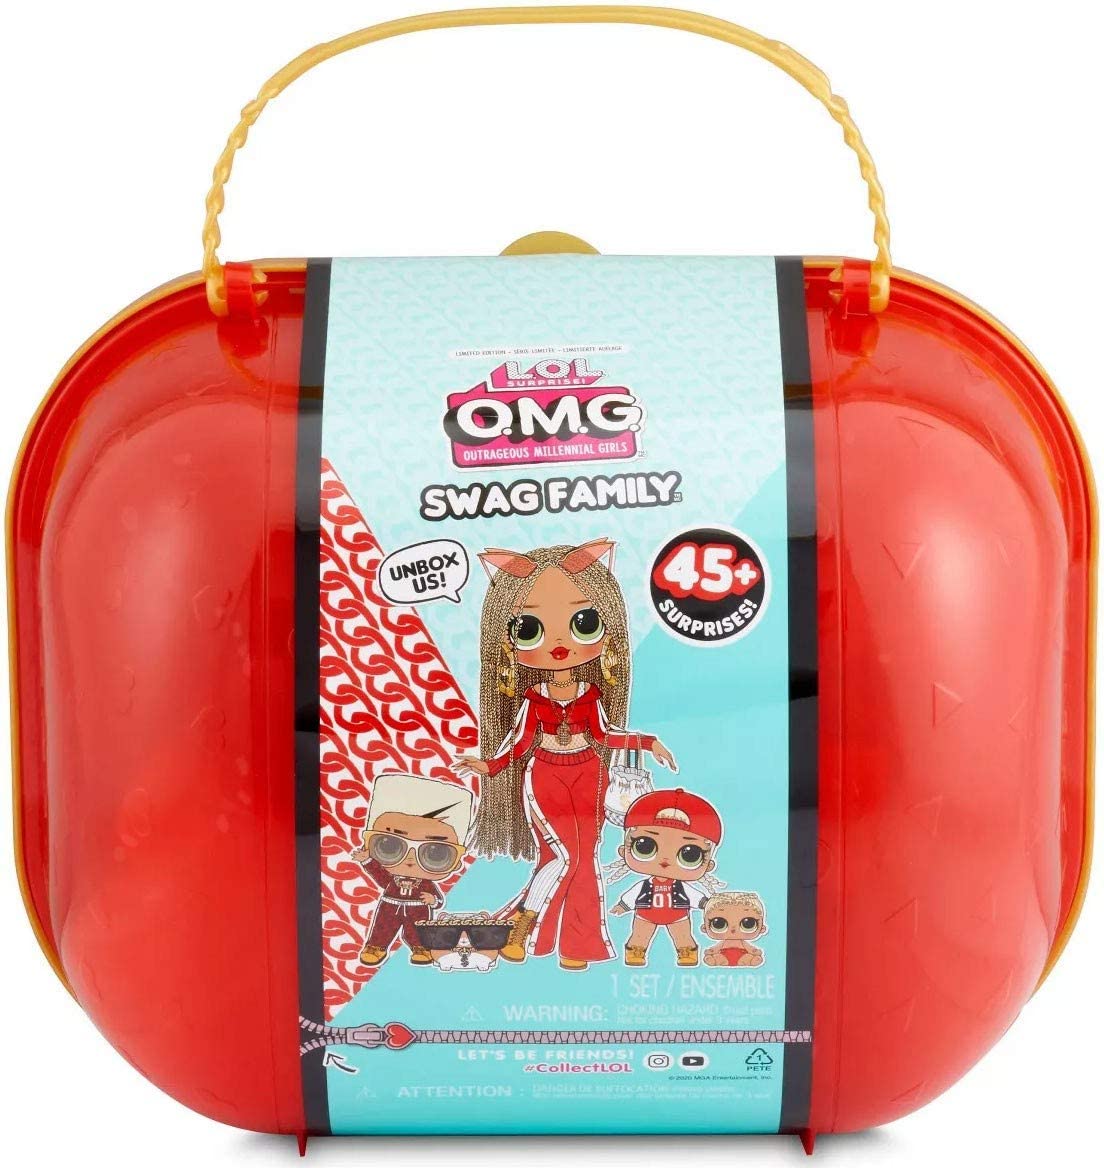 L.O.L. Surprise! Exclusive O.M.G. Swag Family – Limited Edition Fashion Doll, Dolls and Pet with 45+ Surprises